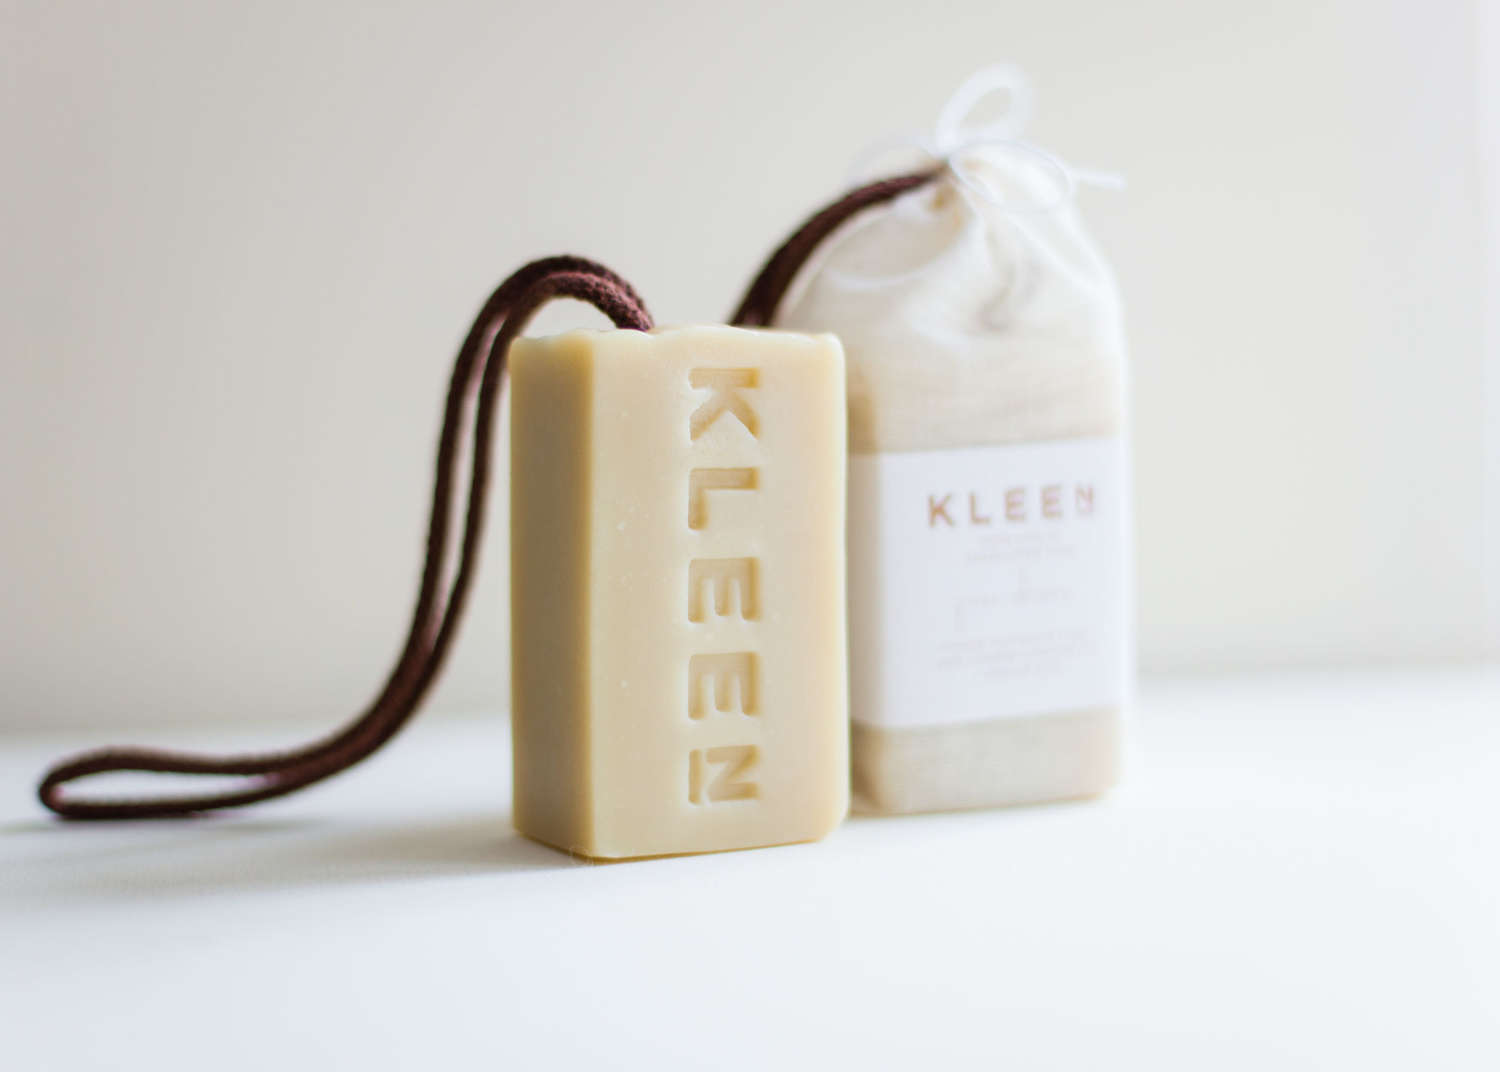 Pure Shores - Kleen 100% Natural handcrafted soap on a rope - 160g